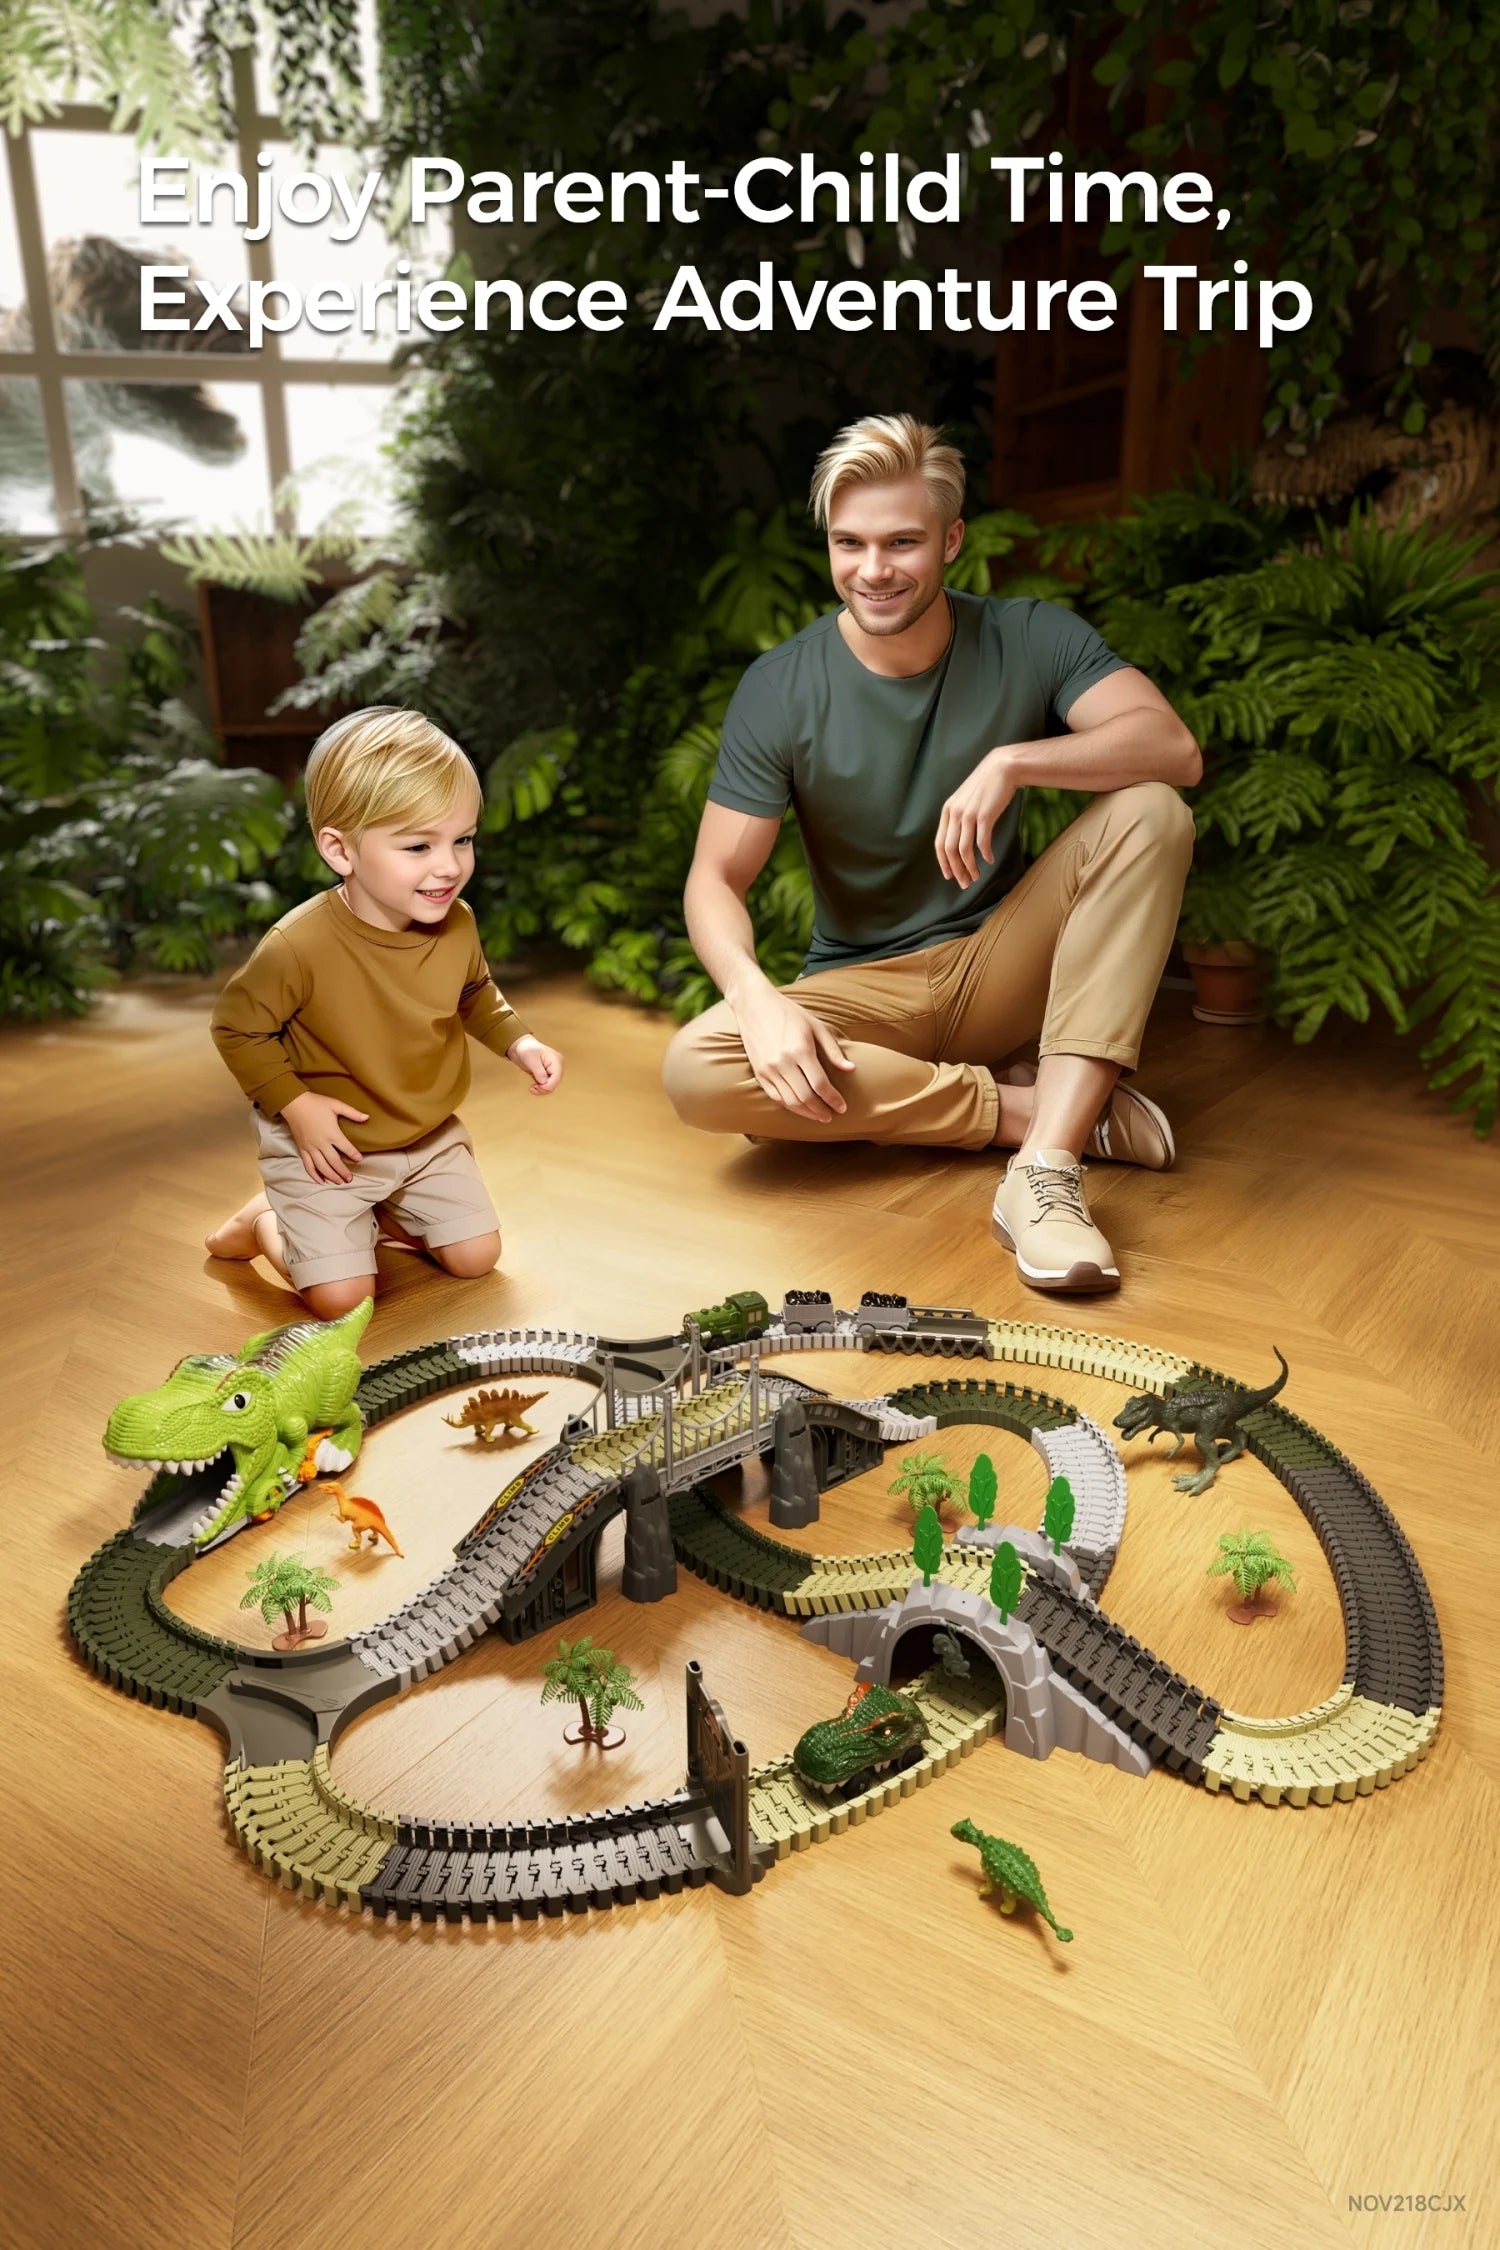 Flexible train tracks featuring dinosaur figures and cars